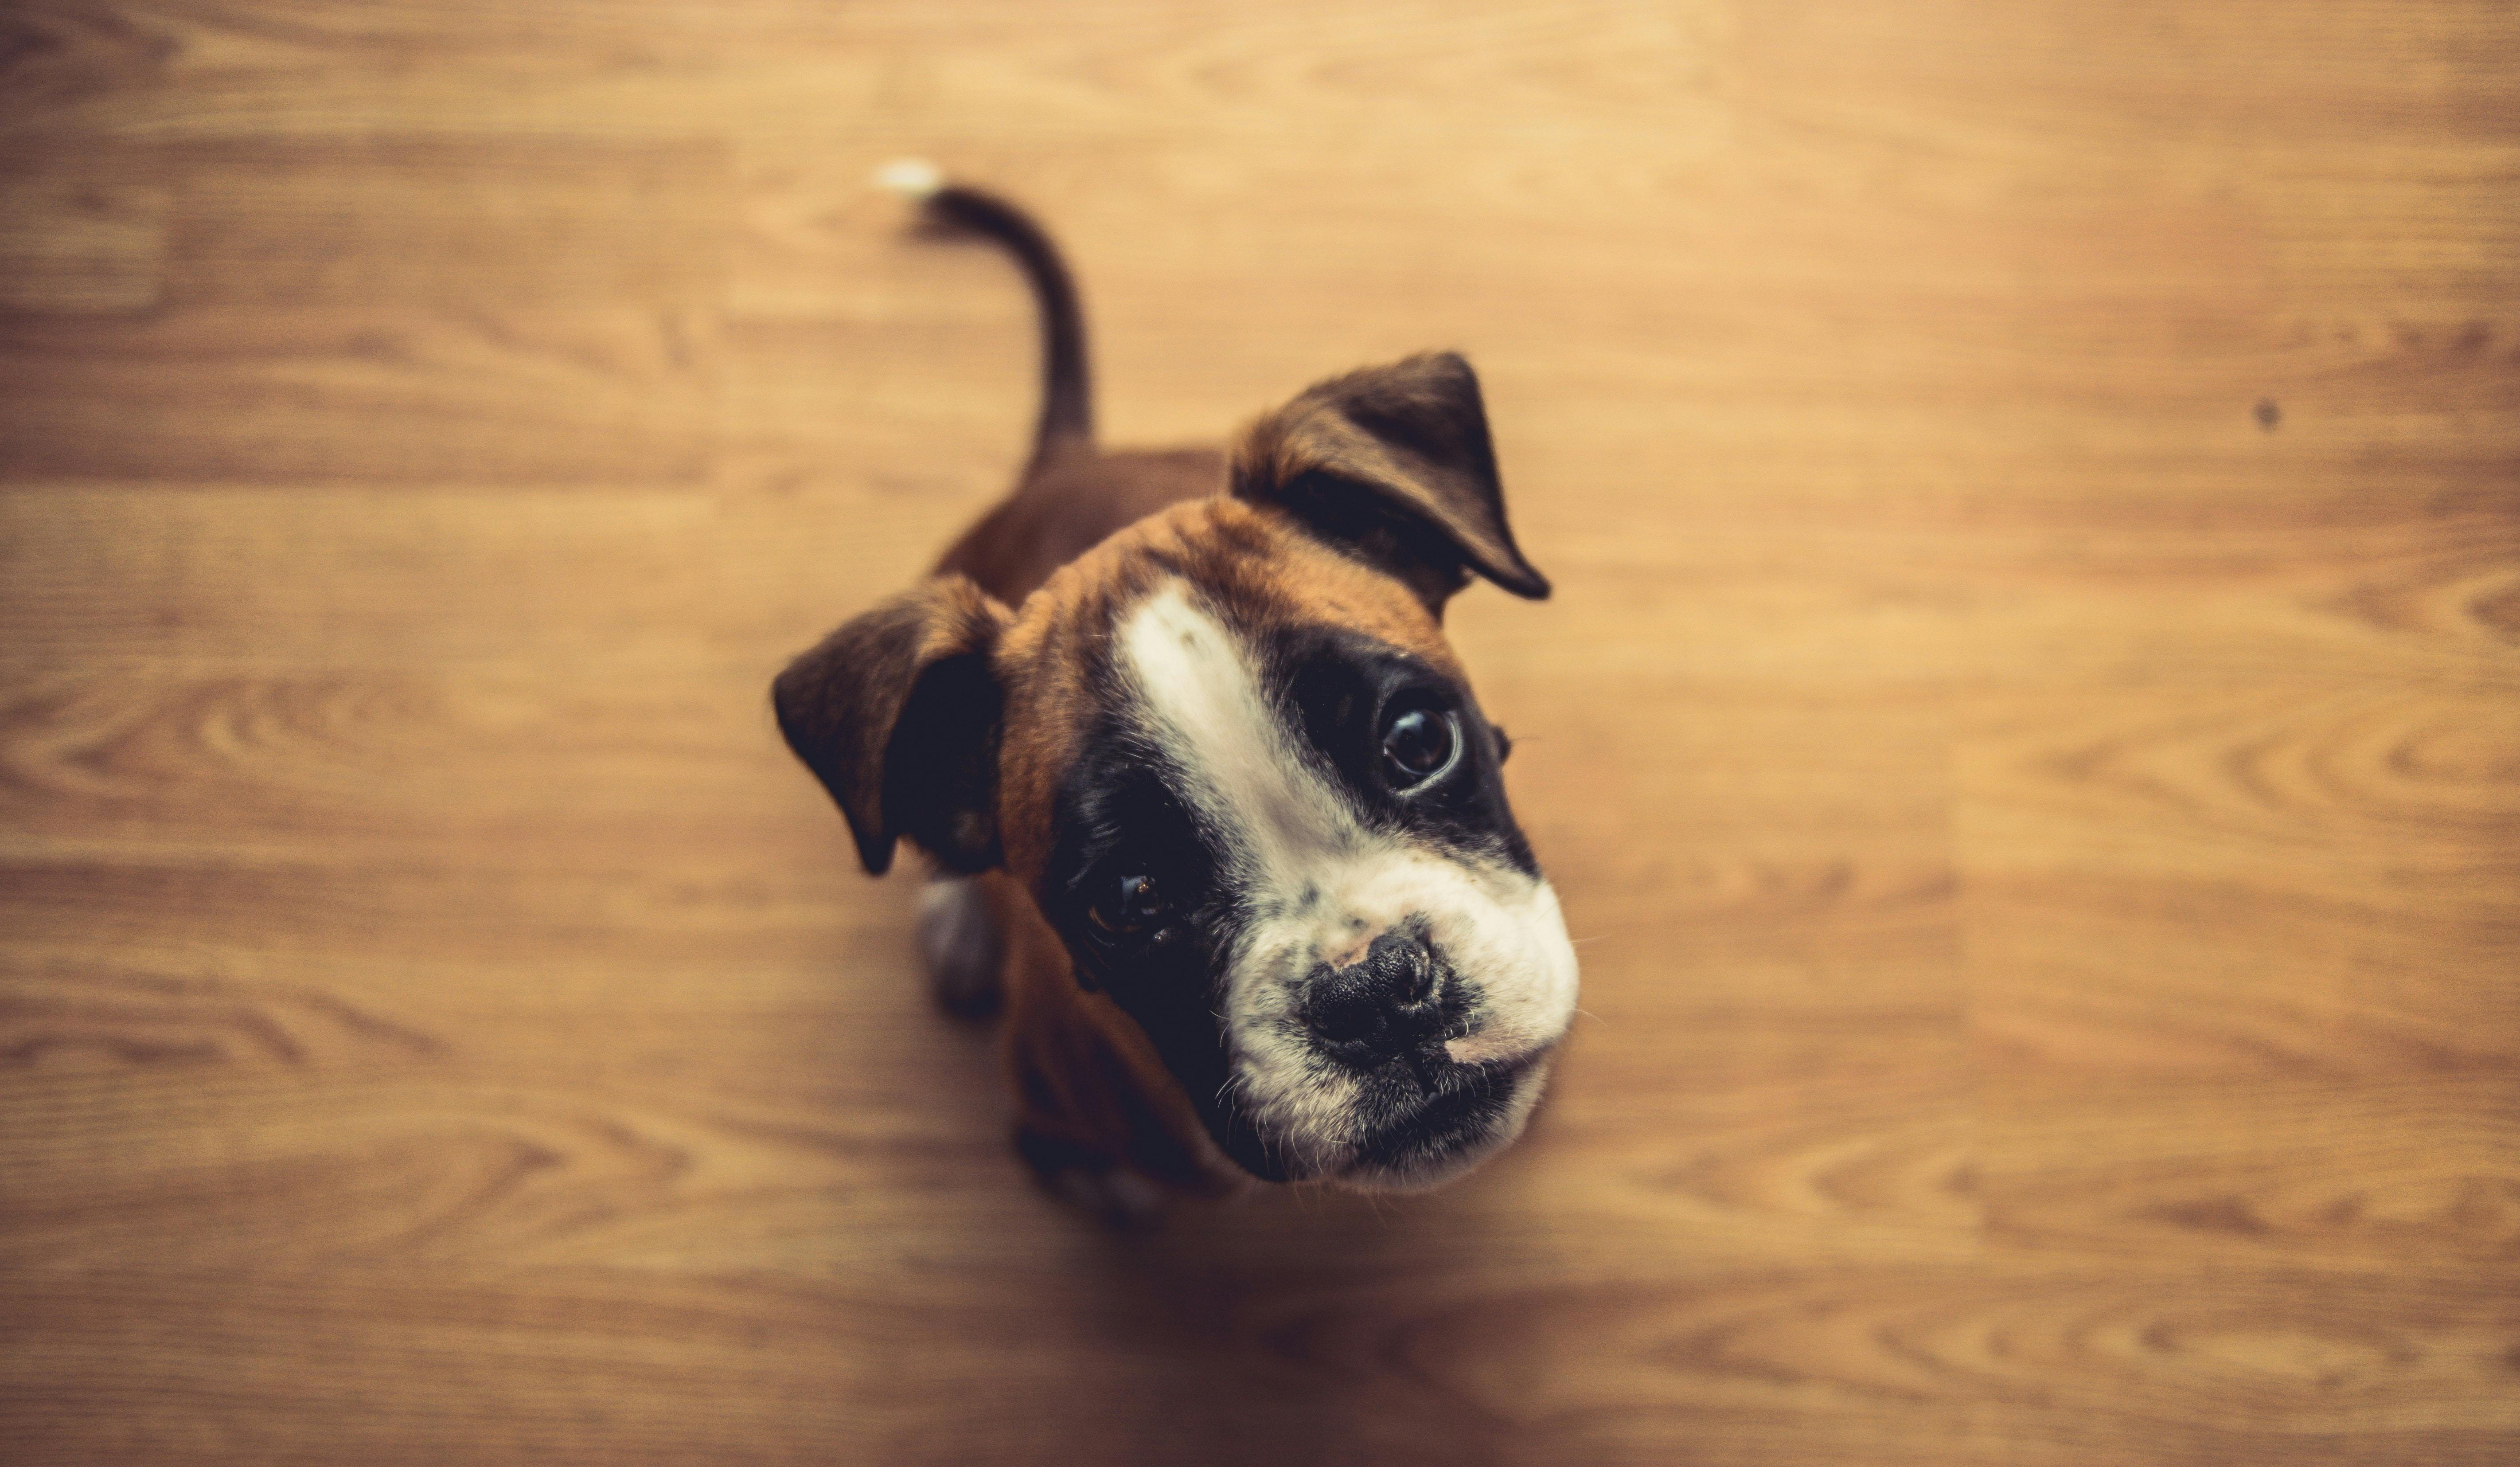 Boxer puppy sitting on the floor and looking at the camera with puppy eyes